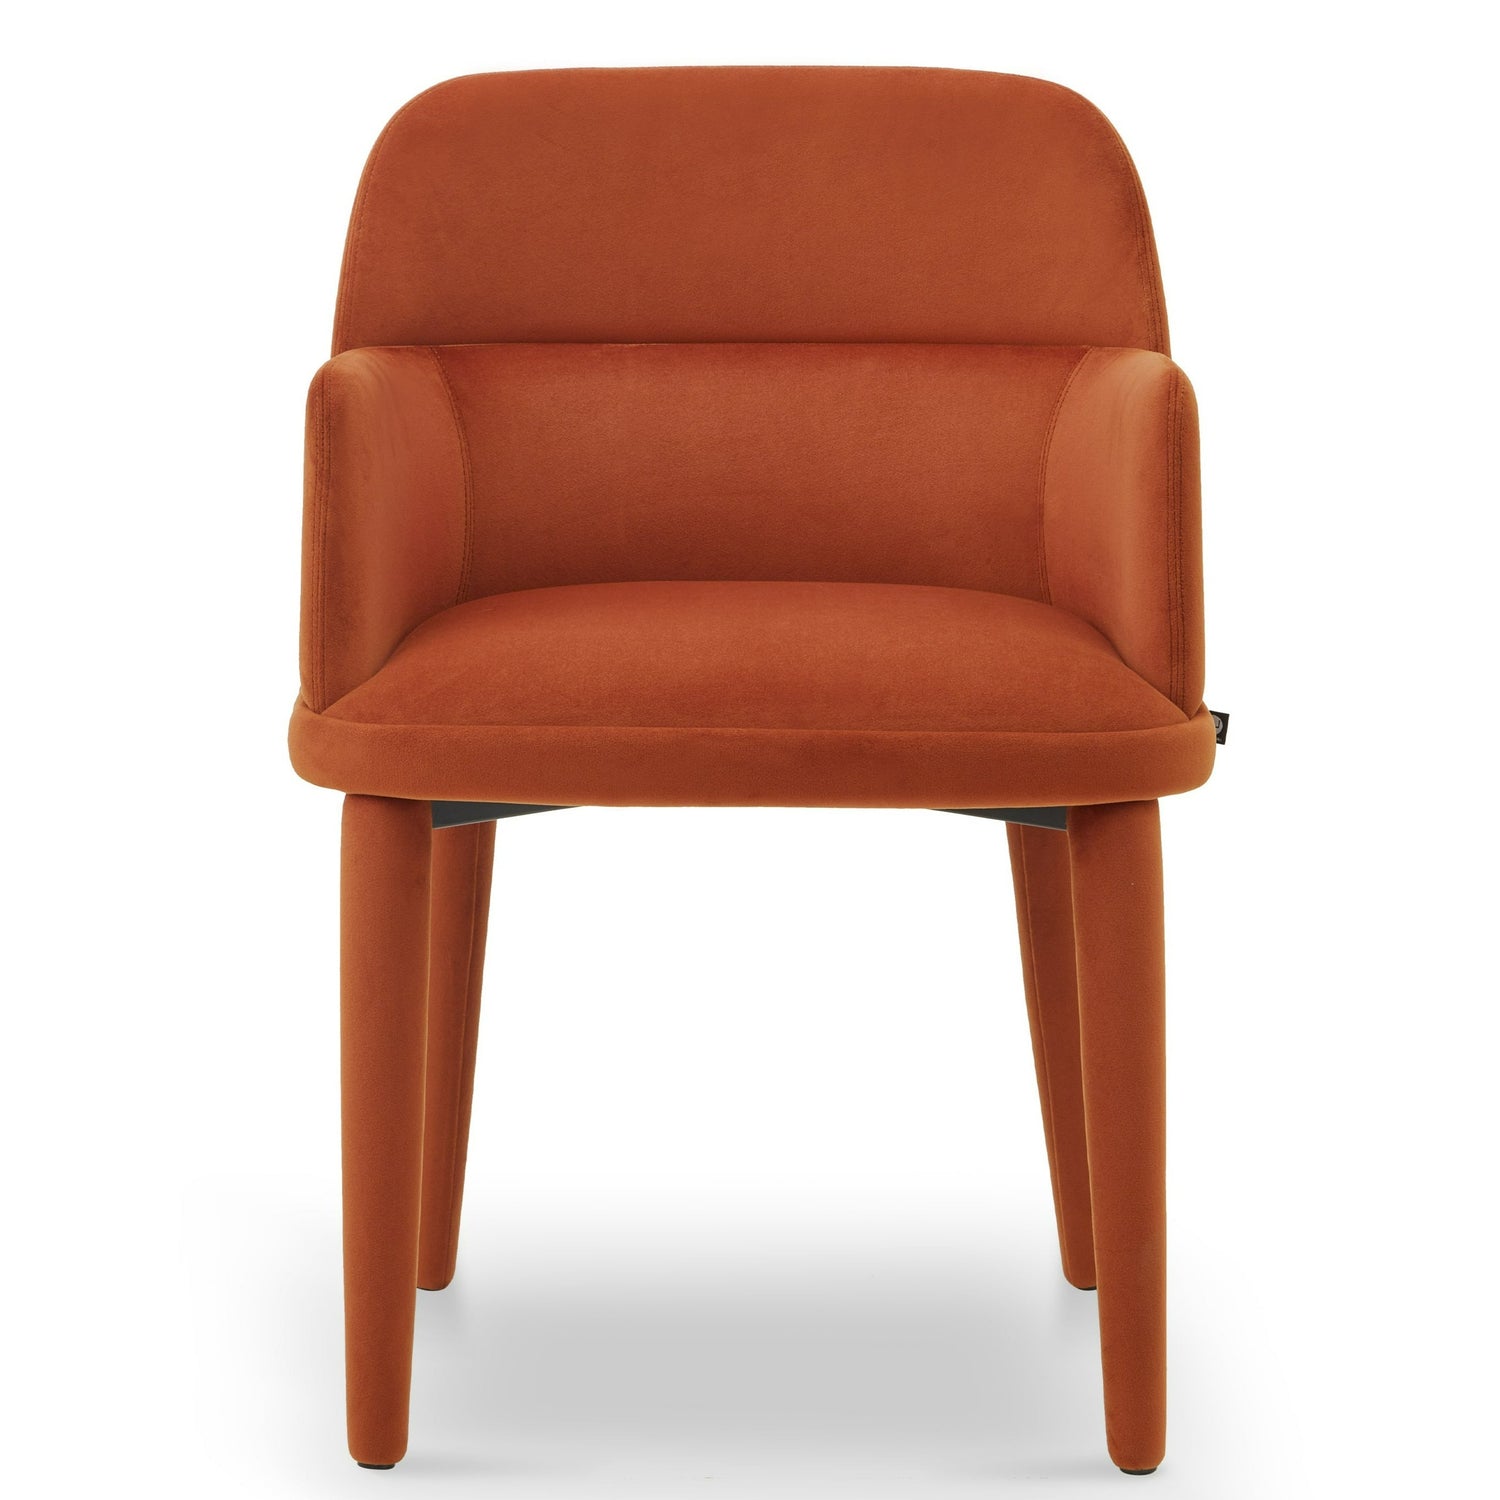  LiangAndEimil-Liang & Eimil Diva Dining Chair with Arms in Kaster Crimson Red-Orange 525 